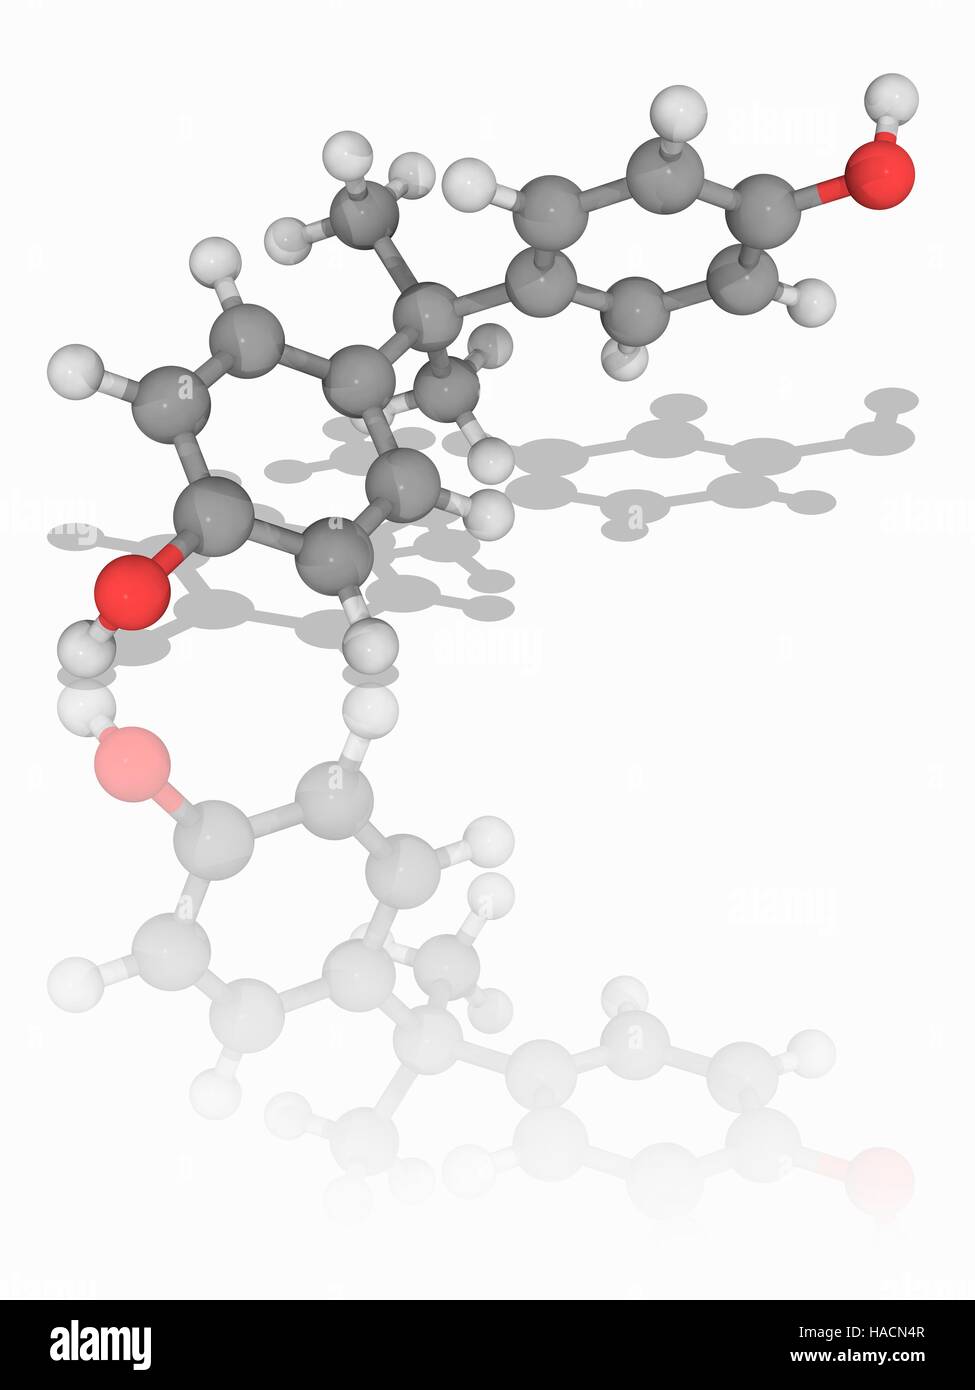 A. Molecular model of the organic compound bisphenol A (BPA, C15.H16.O2). This chemical is used to fabricate polycarbonate polymers epoxy resins. has hormone-like properties and some food-related are